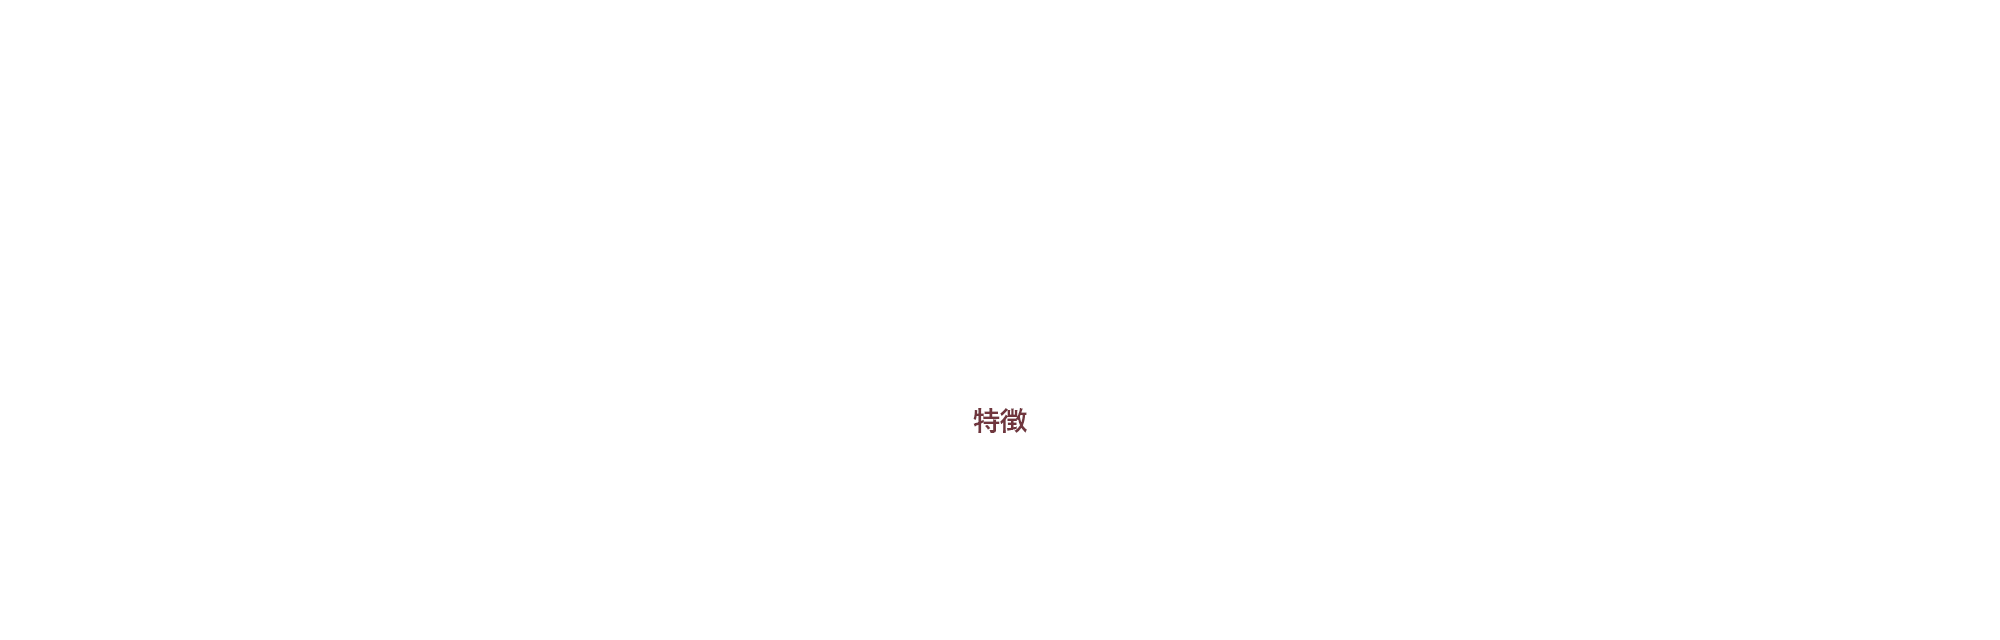 FEATURES